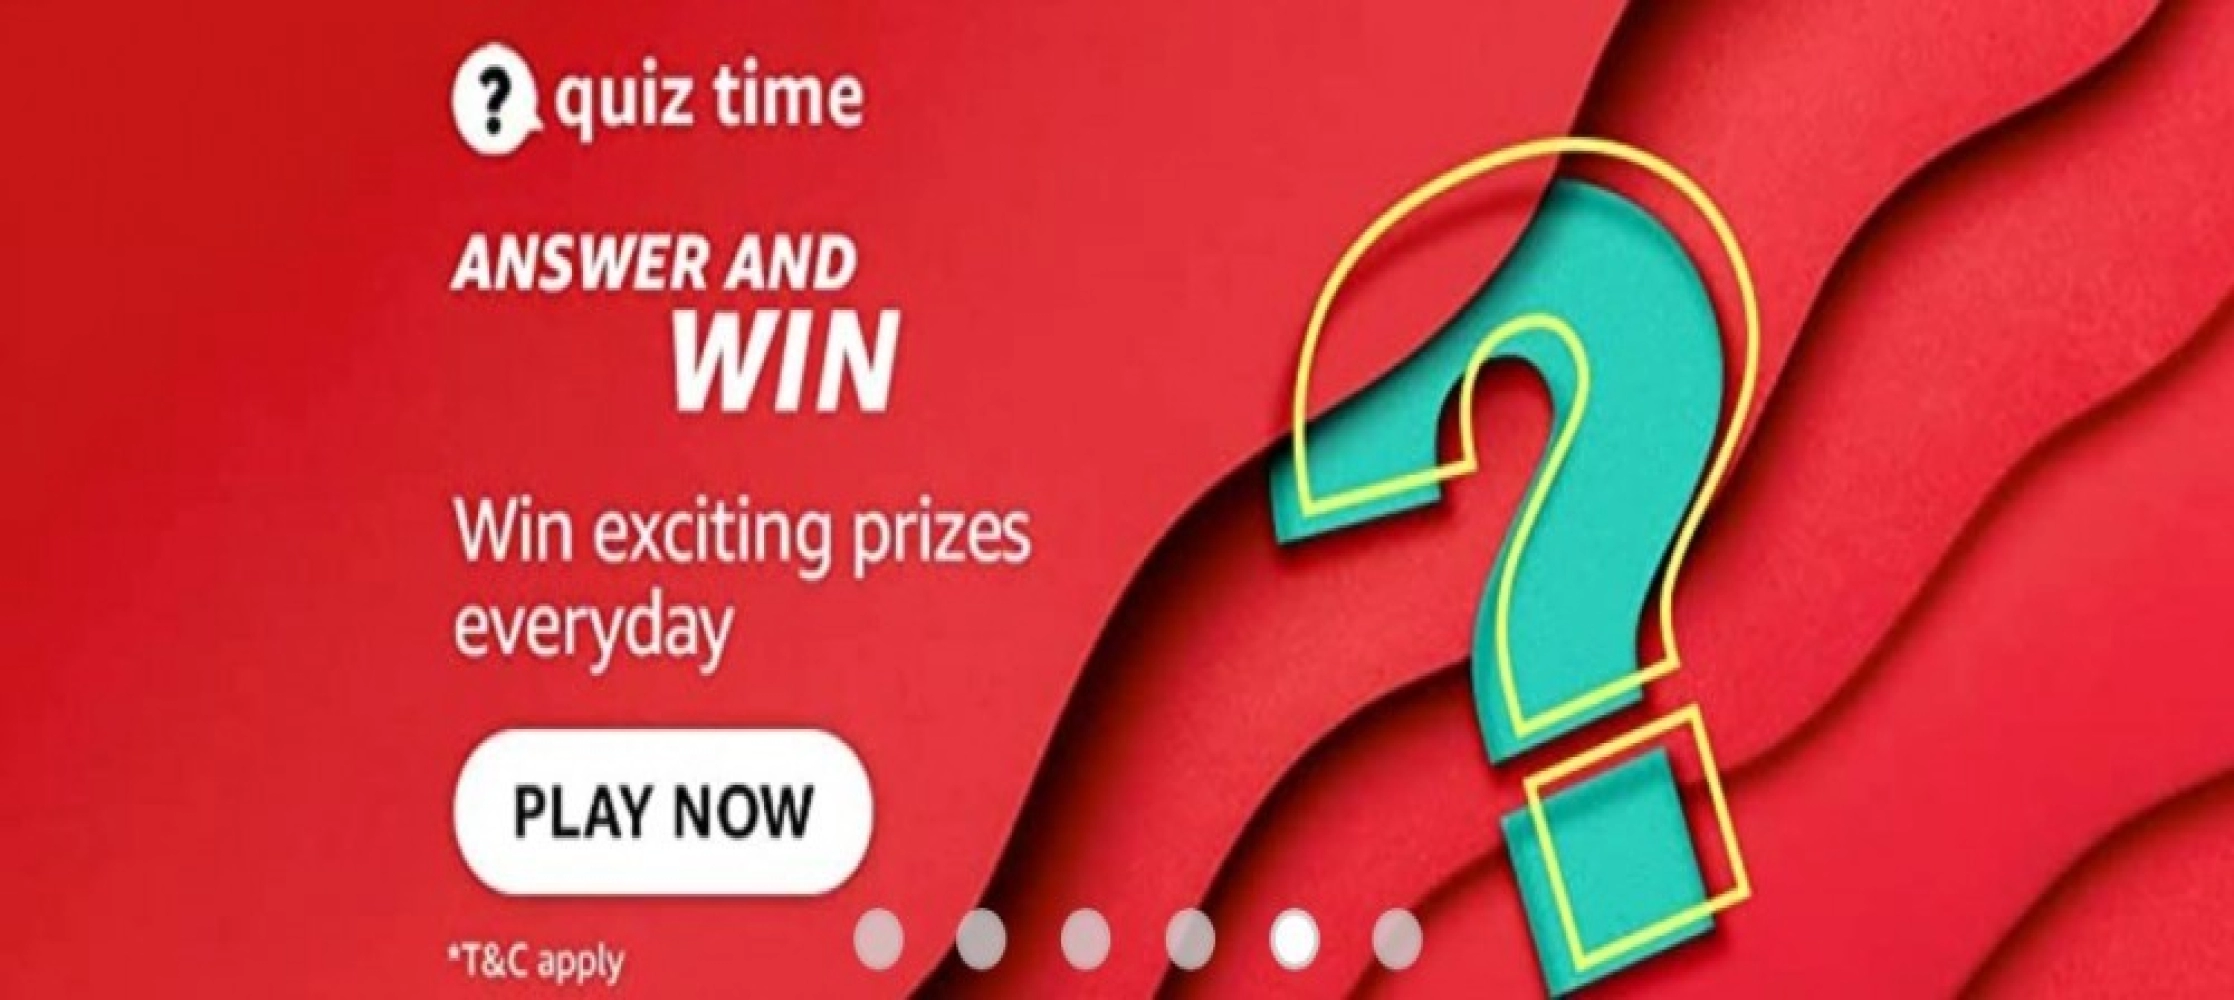 AMAZON QUIZ CONTEST: 30 MAY, 2022 - ANSWER TODAY FOR THE QUESTIONS AND GET A CHANCE TO WIN AMAZON PAY RS.1,000